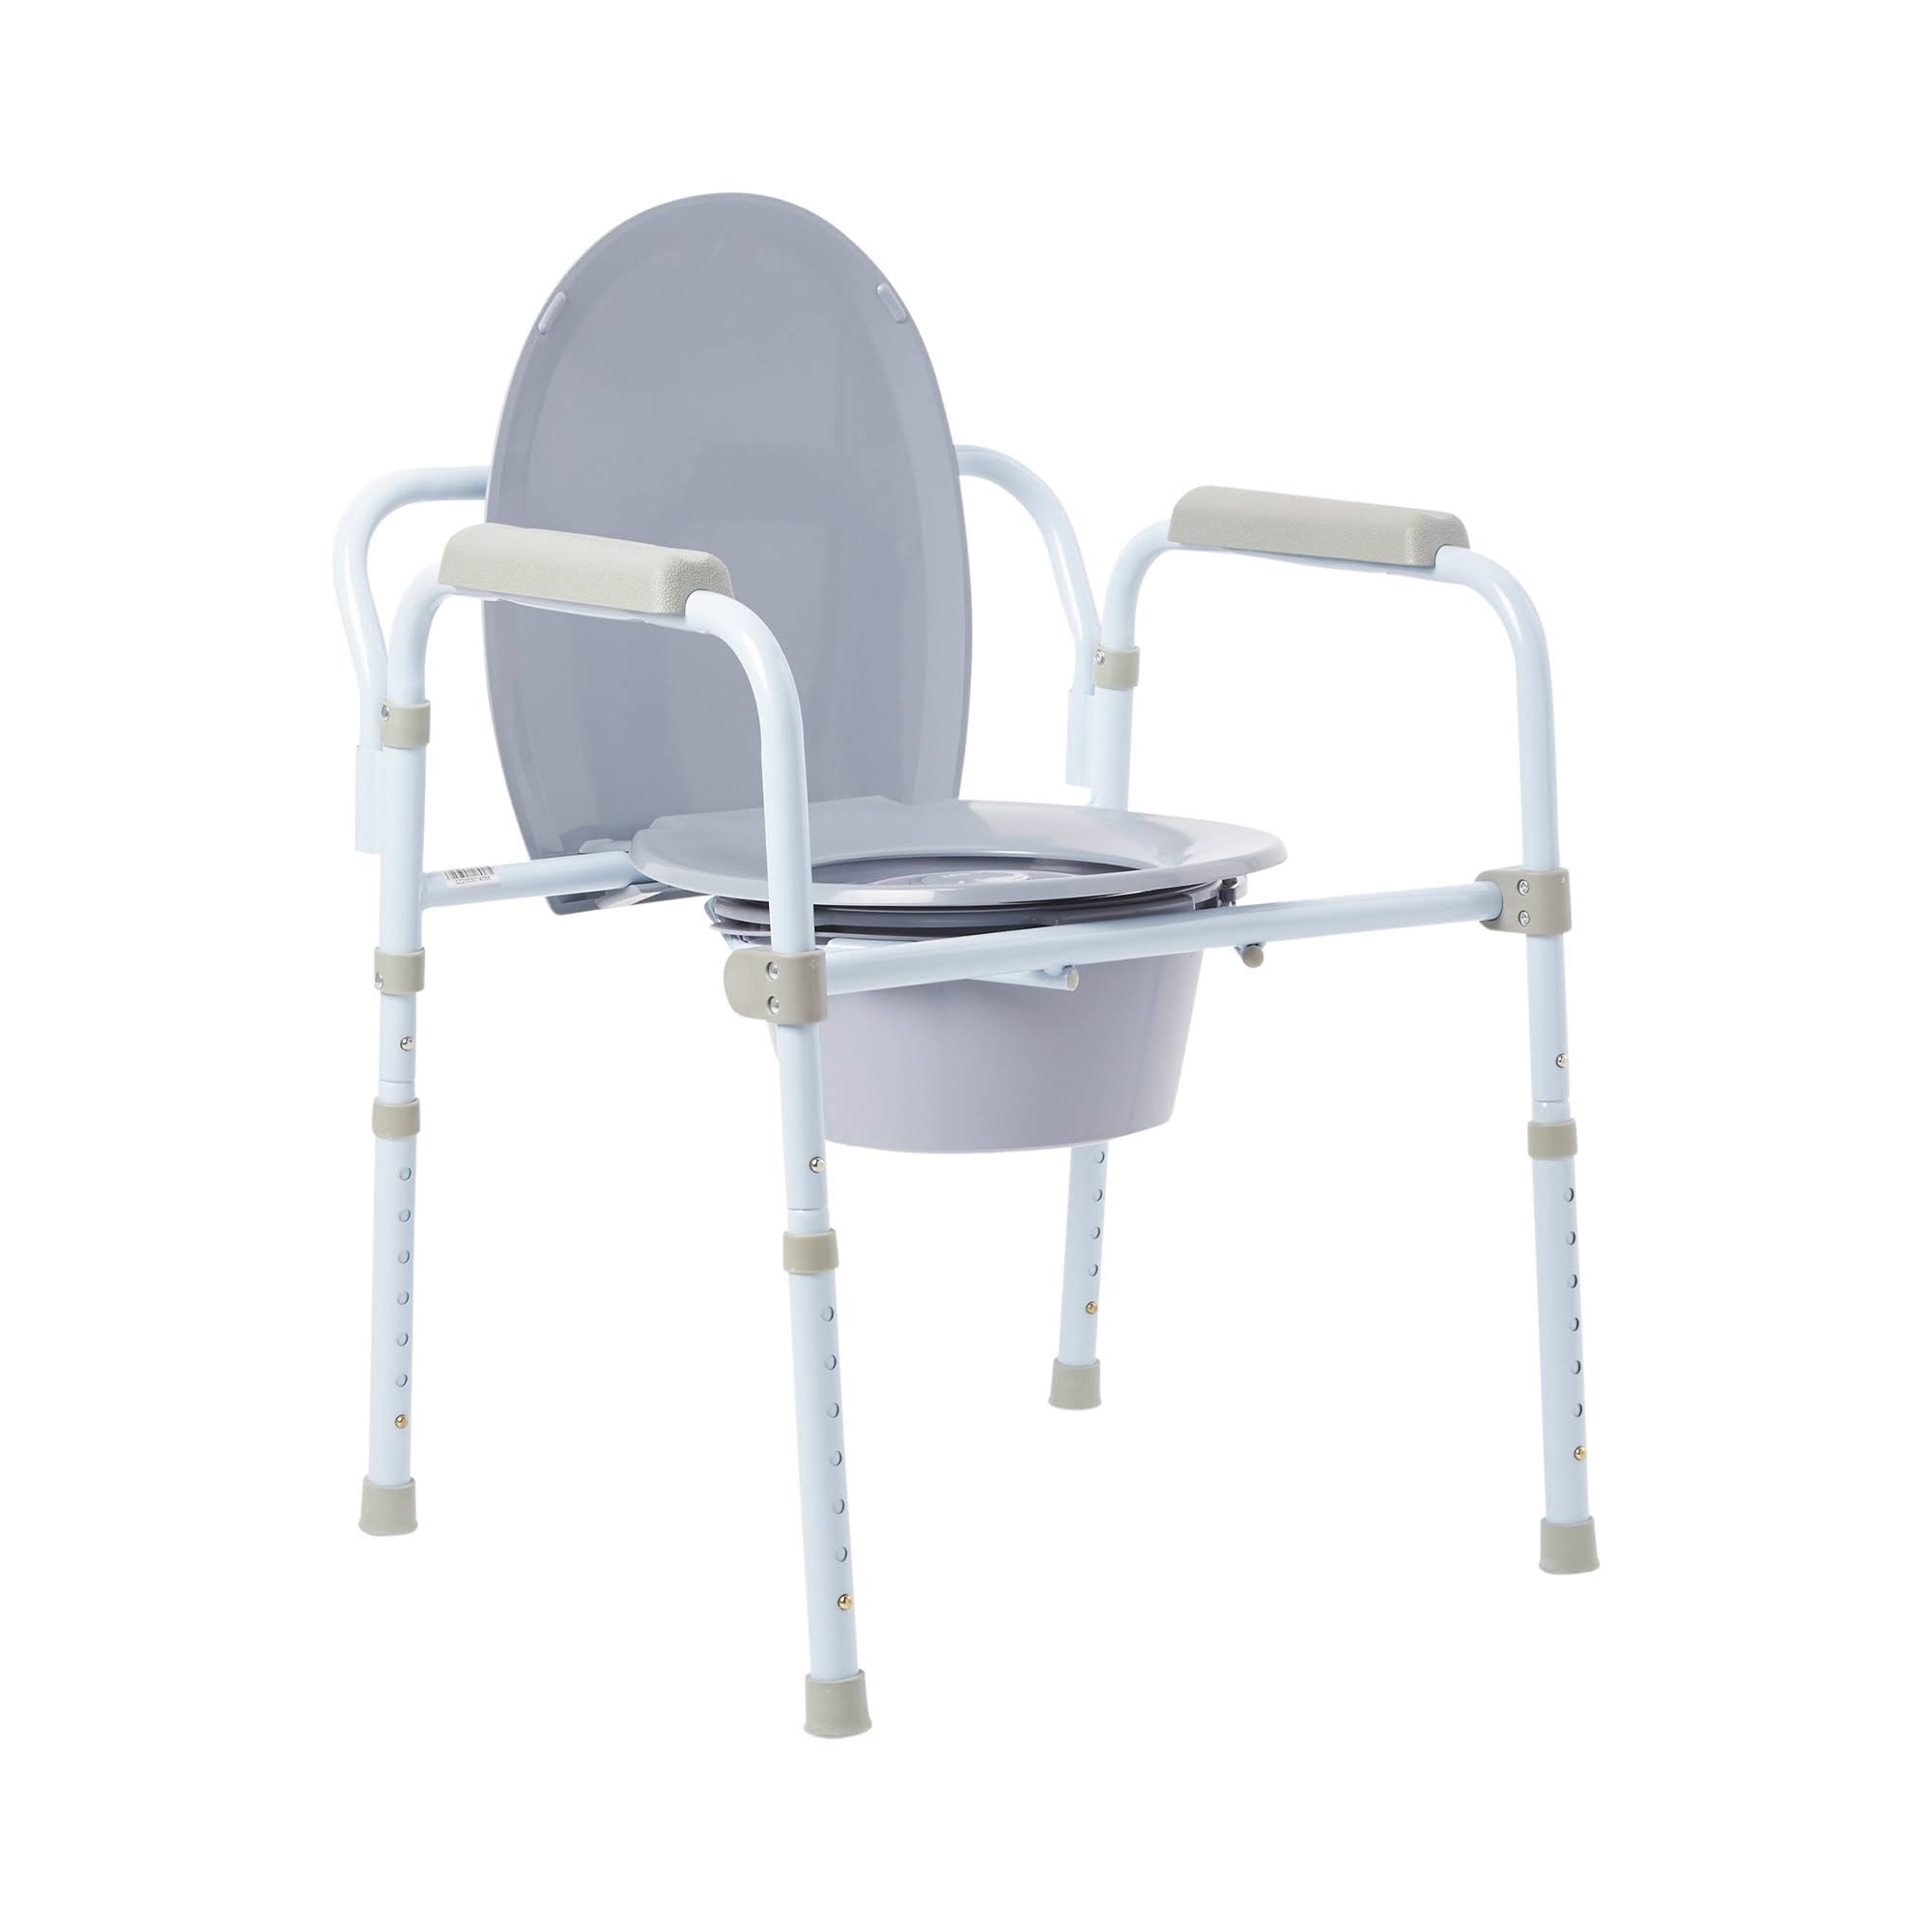 McKesson Drive Commode Chair Fixed Arm Steel Frame Seat Lid Back 17 to 60cm | Medical Supplies & Equipment